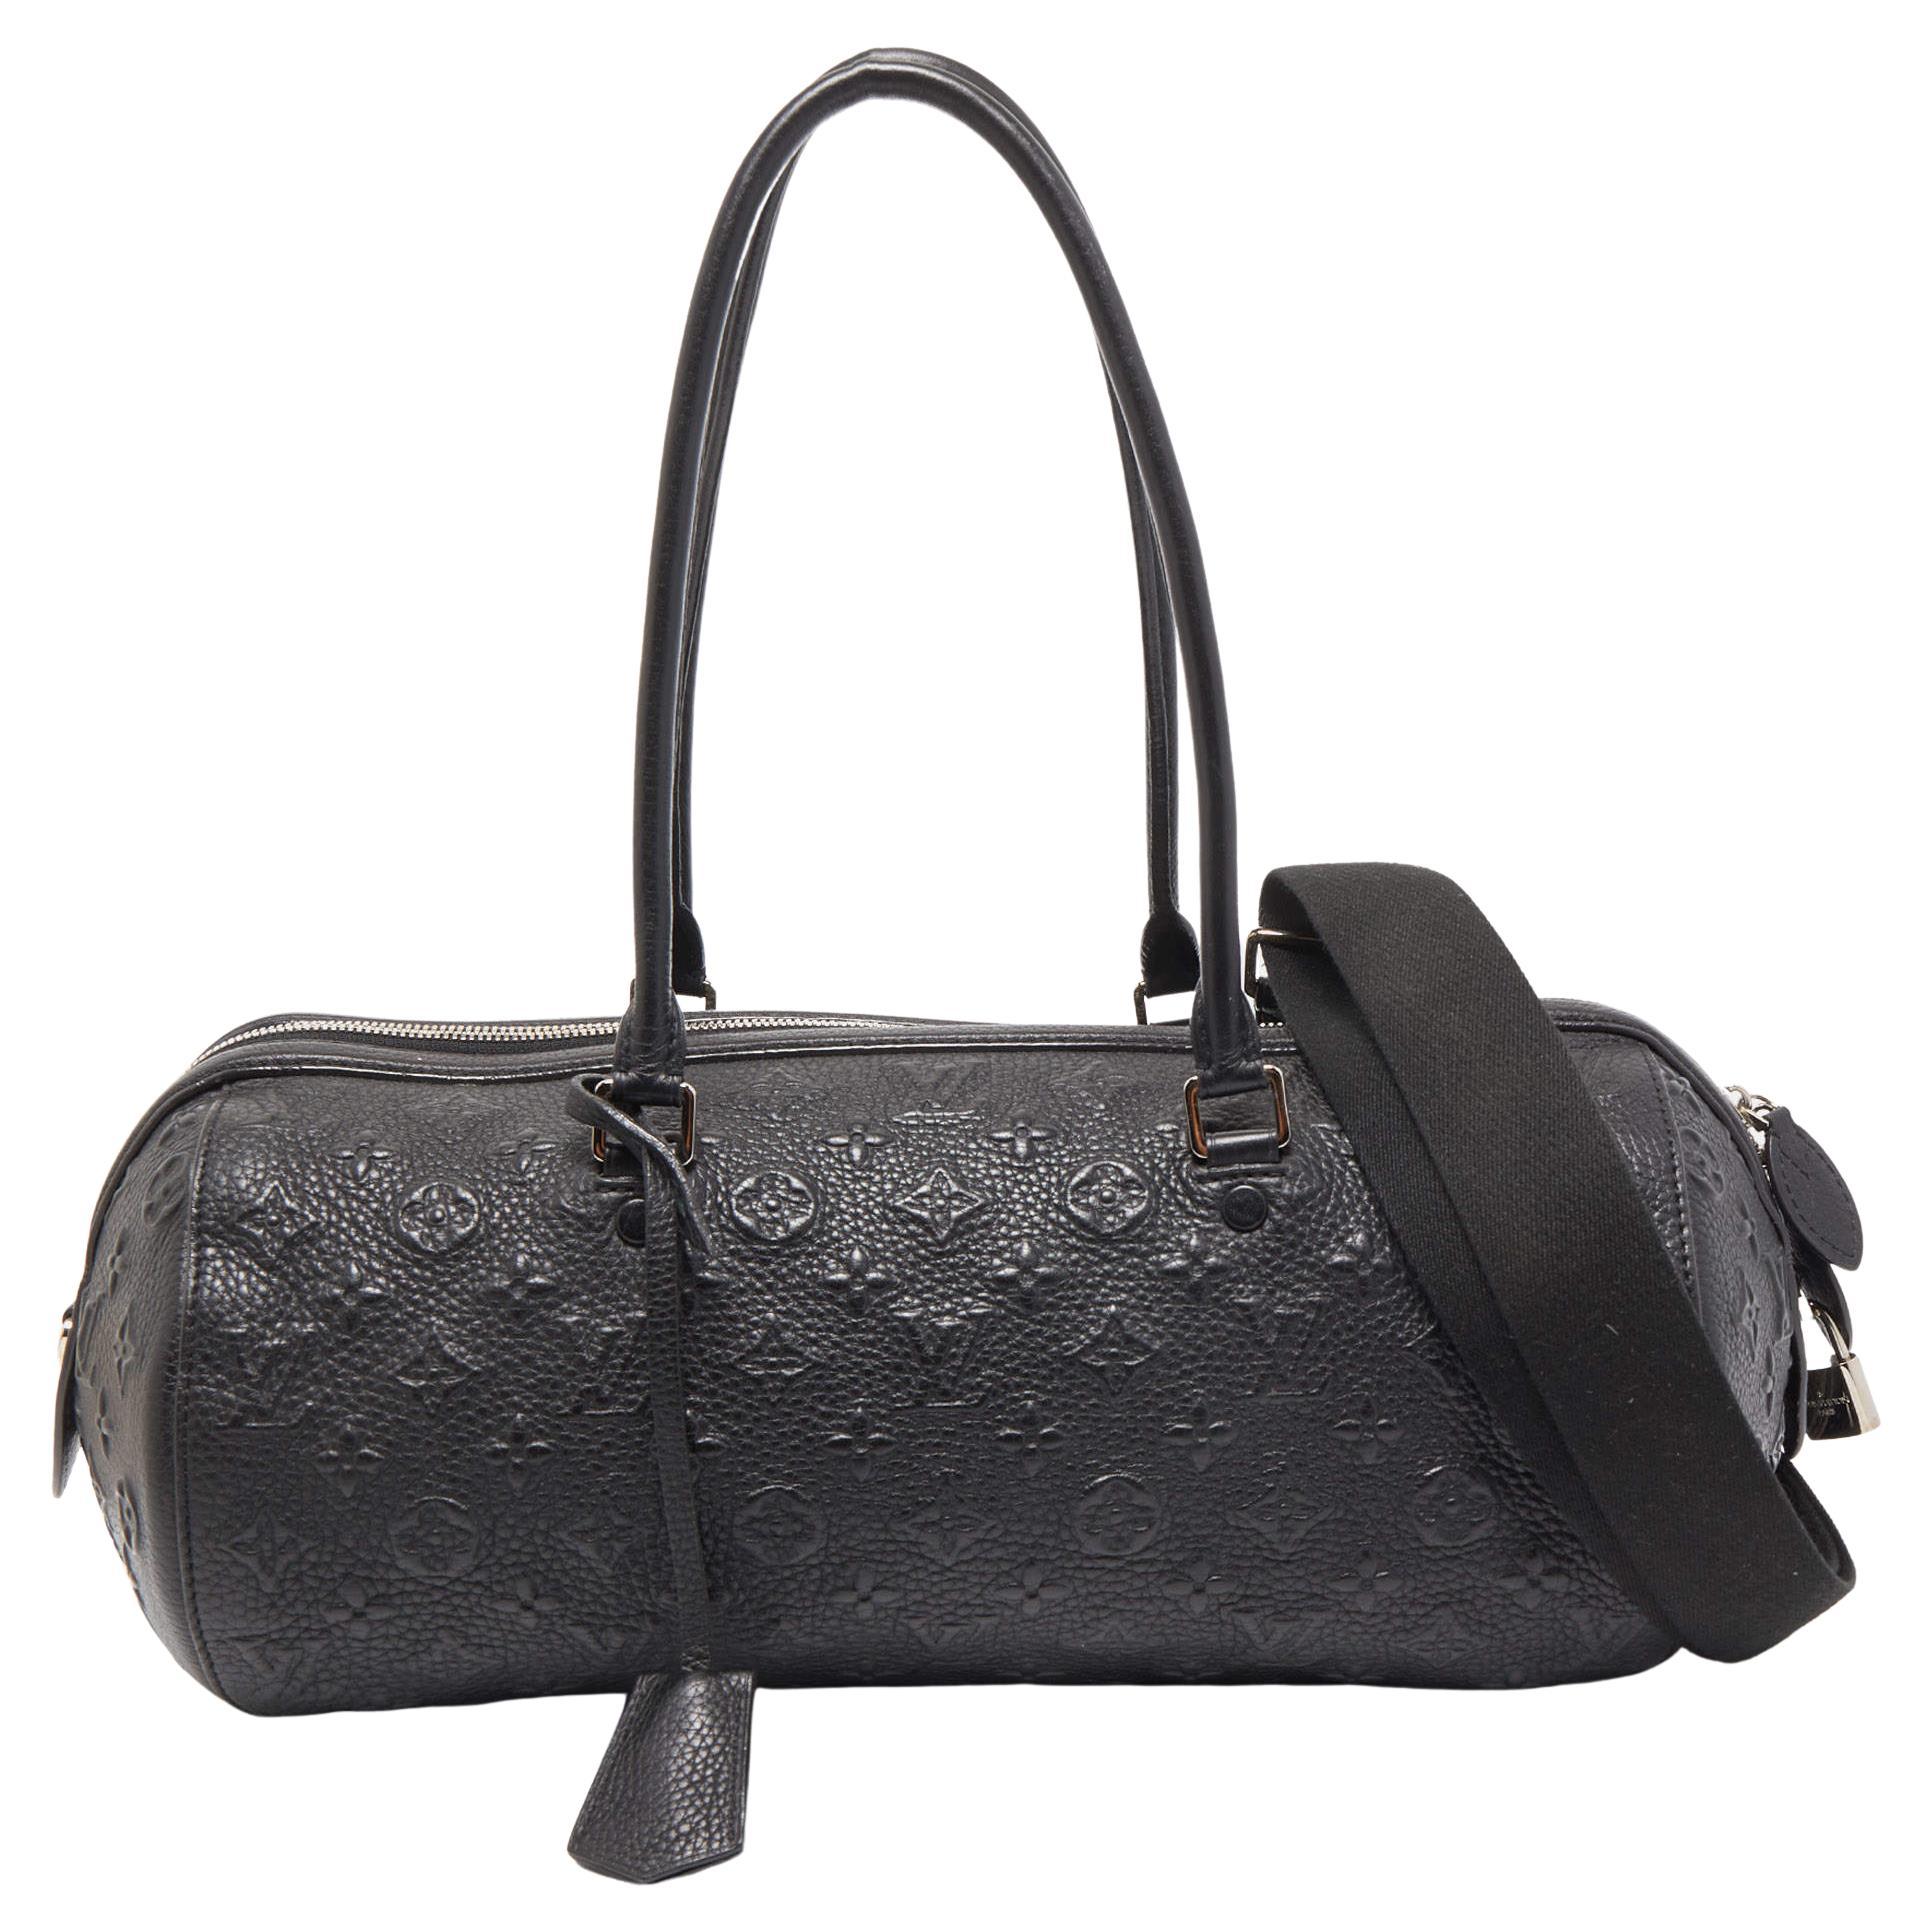 Louis Vuitton Black Leather Purses - 971 For Sale on 1stDibs